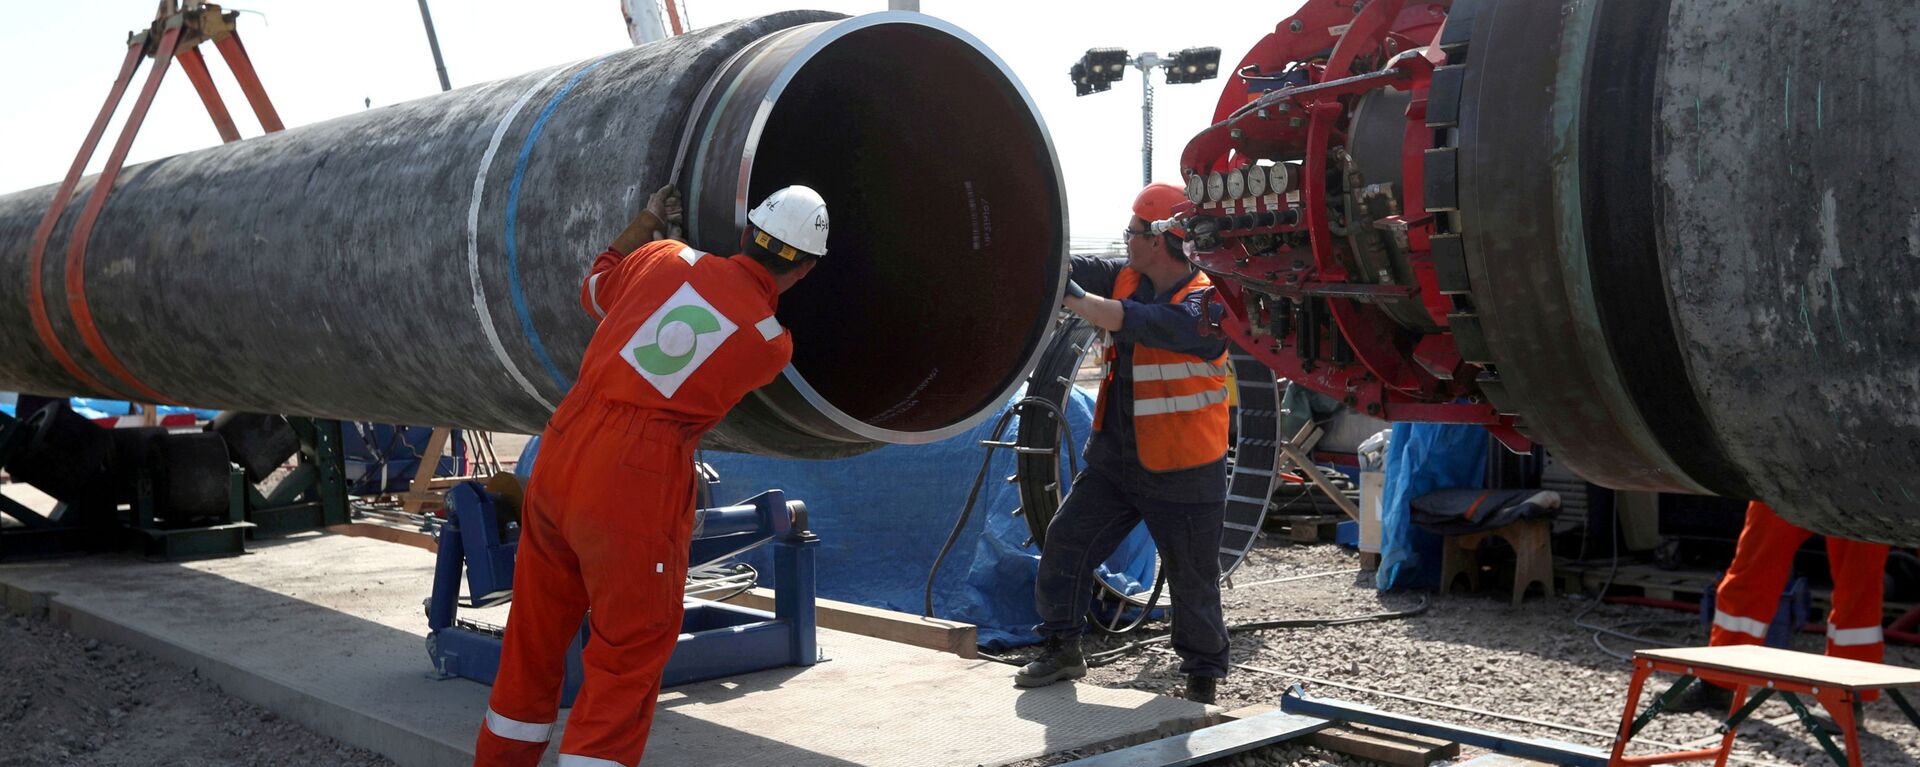 FILE PHOTO: Workers are seen at the construction site of the Nord Stream 2 gas pipeline, near the town of Kingisepp, Leningrad region, Russia, June 5, 2019 - Sputnik International, 1920, 24.08.2021